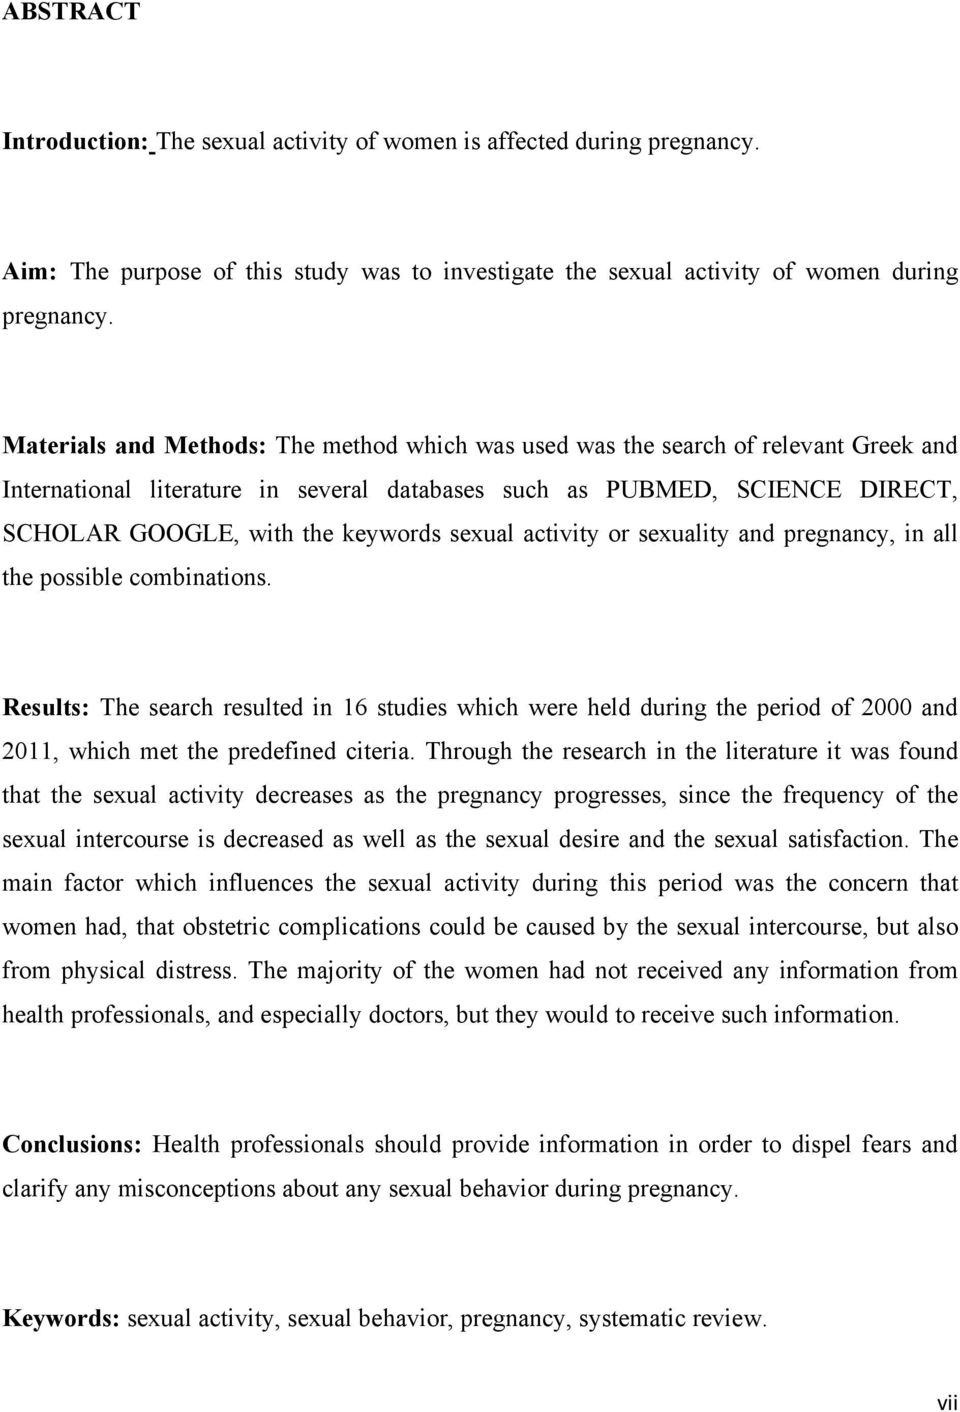 sexual activity or sexuality and pregnancy, in all the possible combinations.